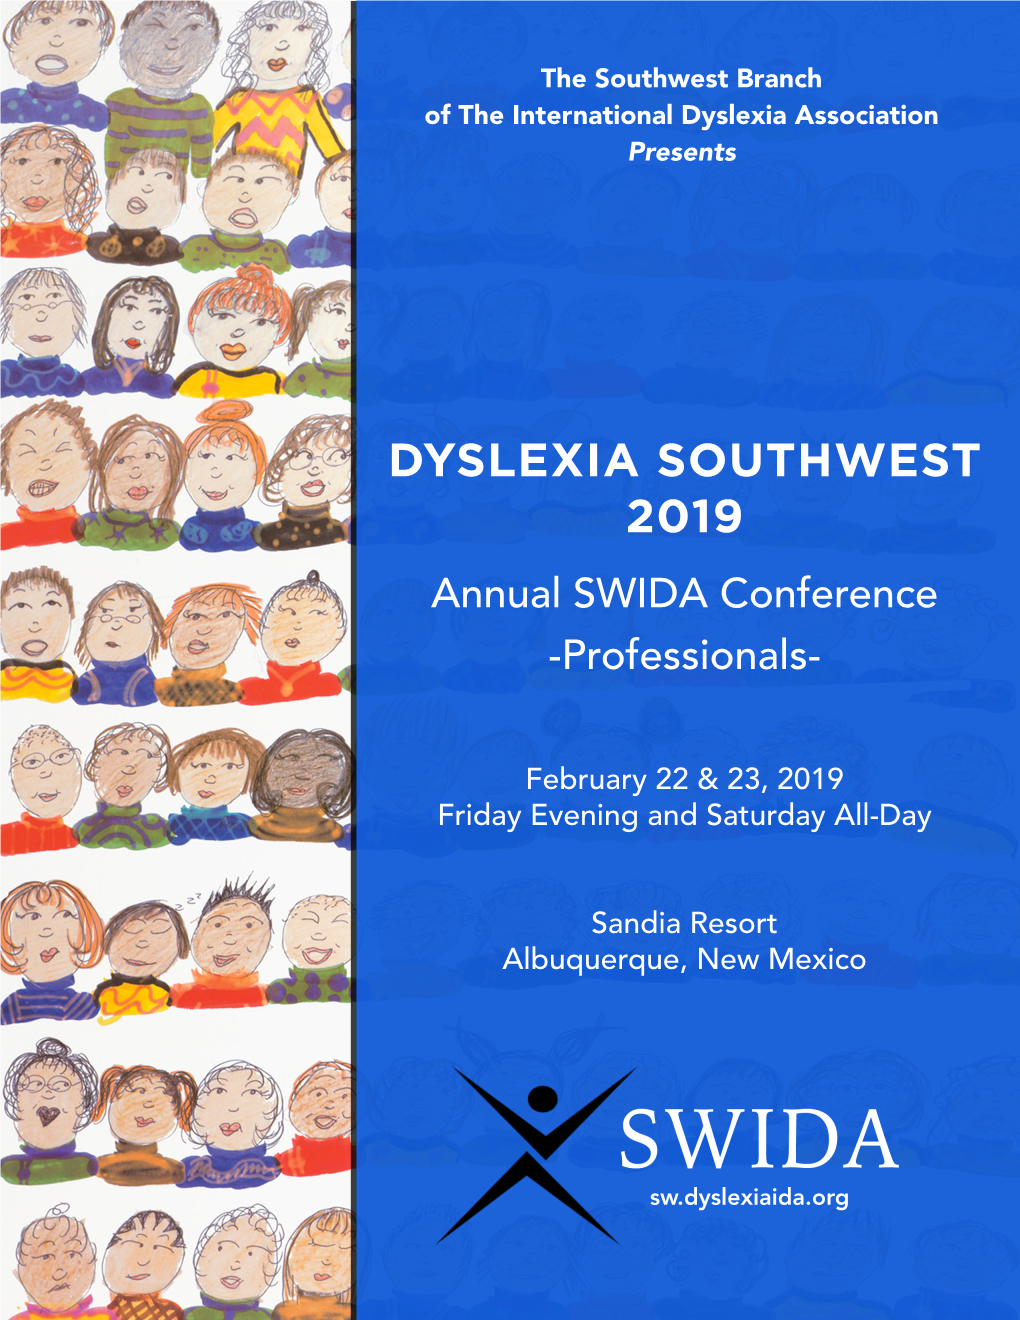 DYSLEXIA SOUTHWEST 2019 Annual SWIDA Conference -Professionals